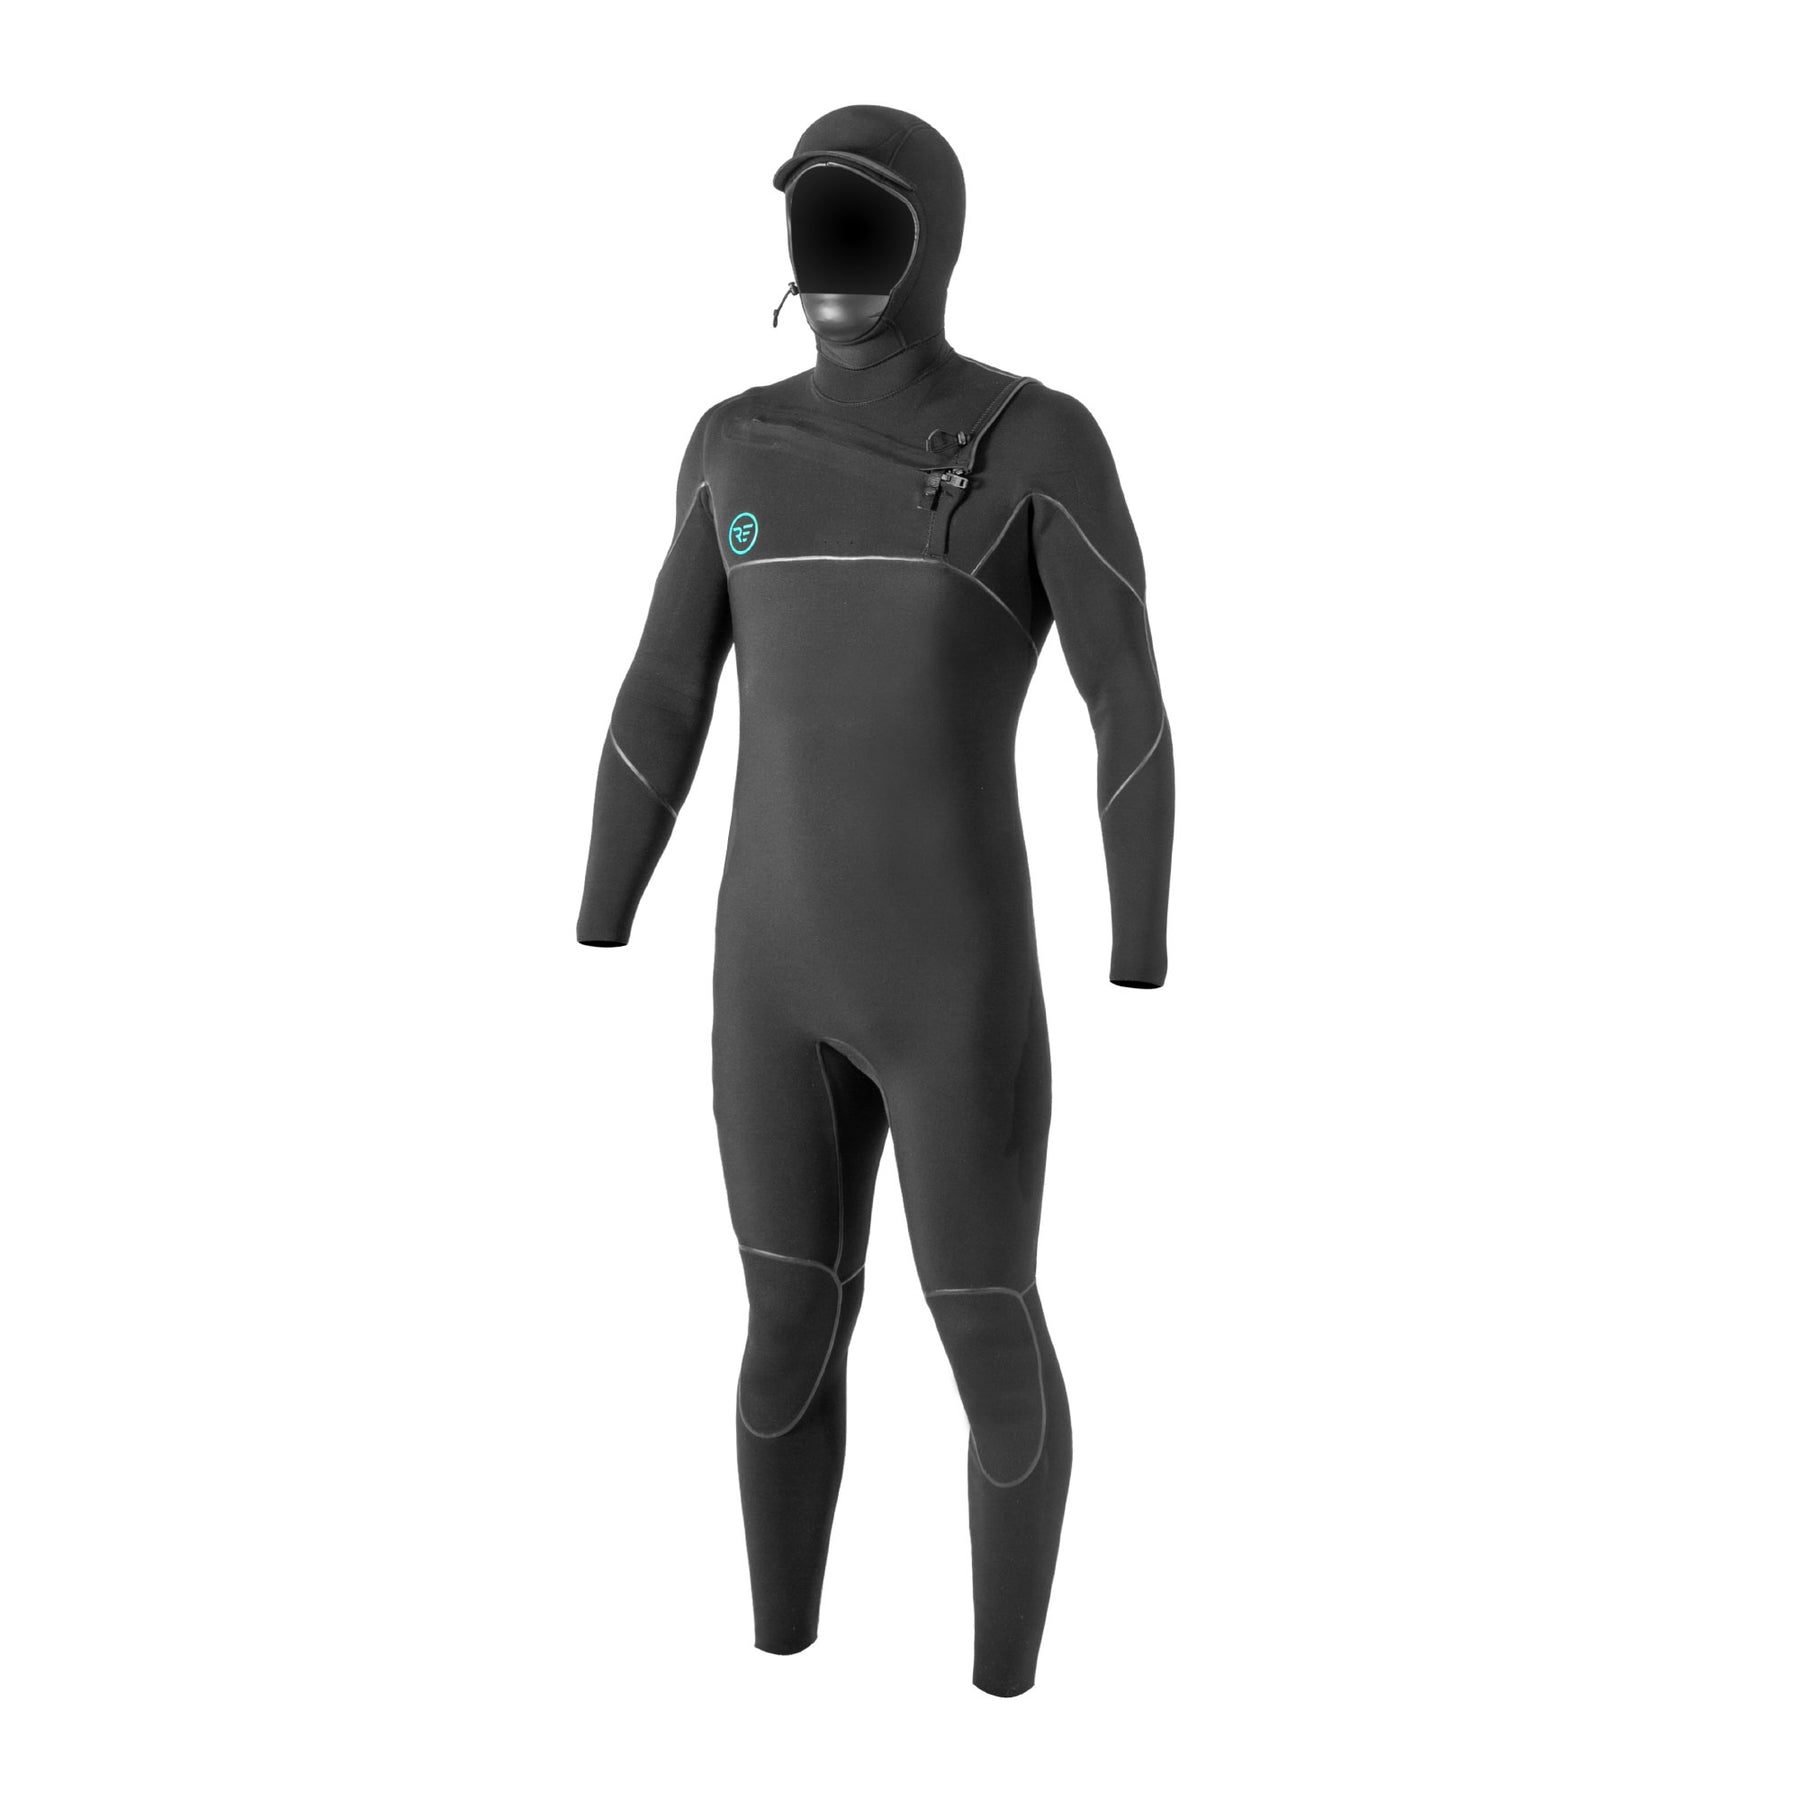 Ride Engine Apoc 5/4/3 FZ Hooded Wetsuit – XL – The Foiling Collective